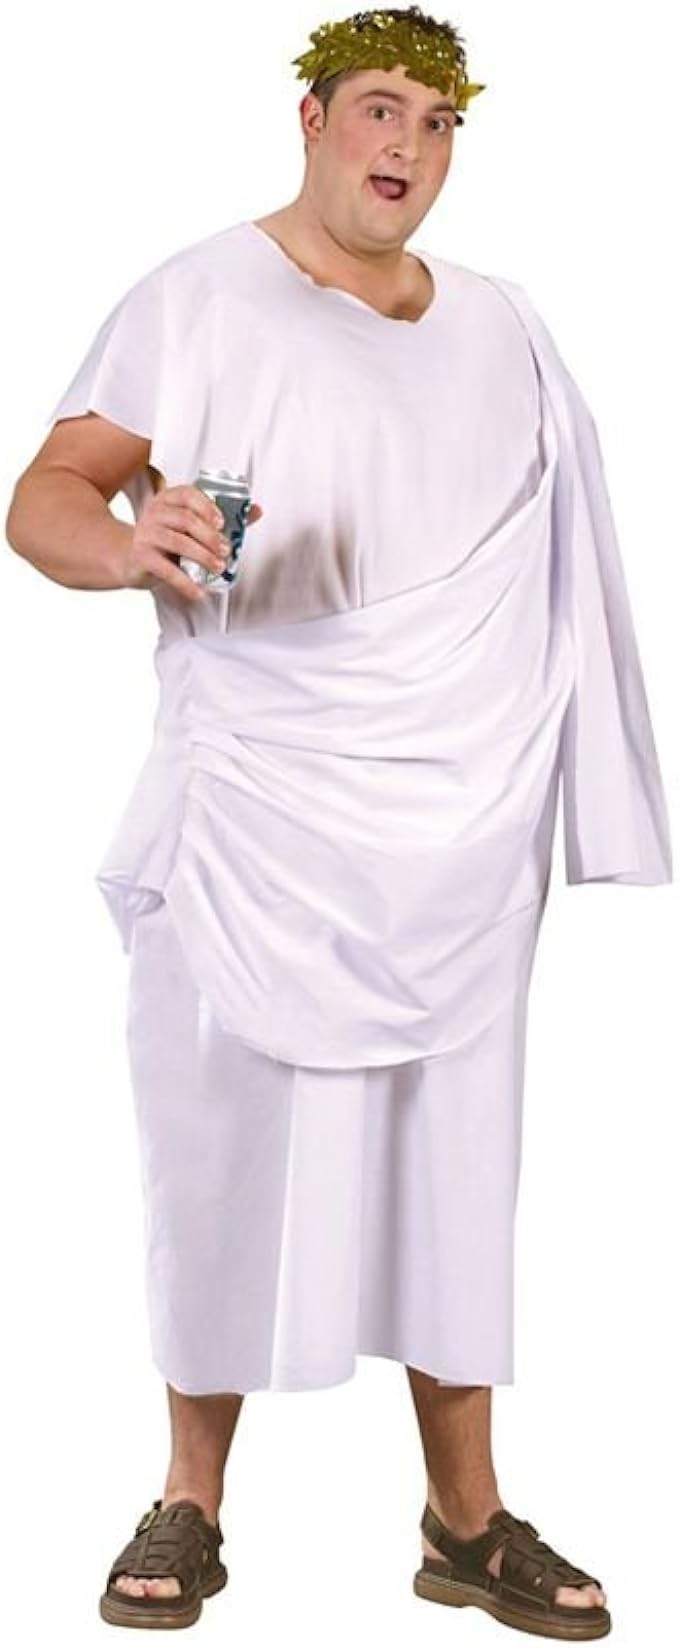 brian pfiffner reccomend how to make a toga out of a sheet pic